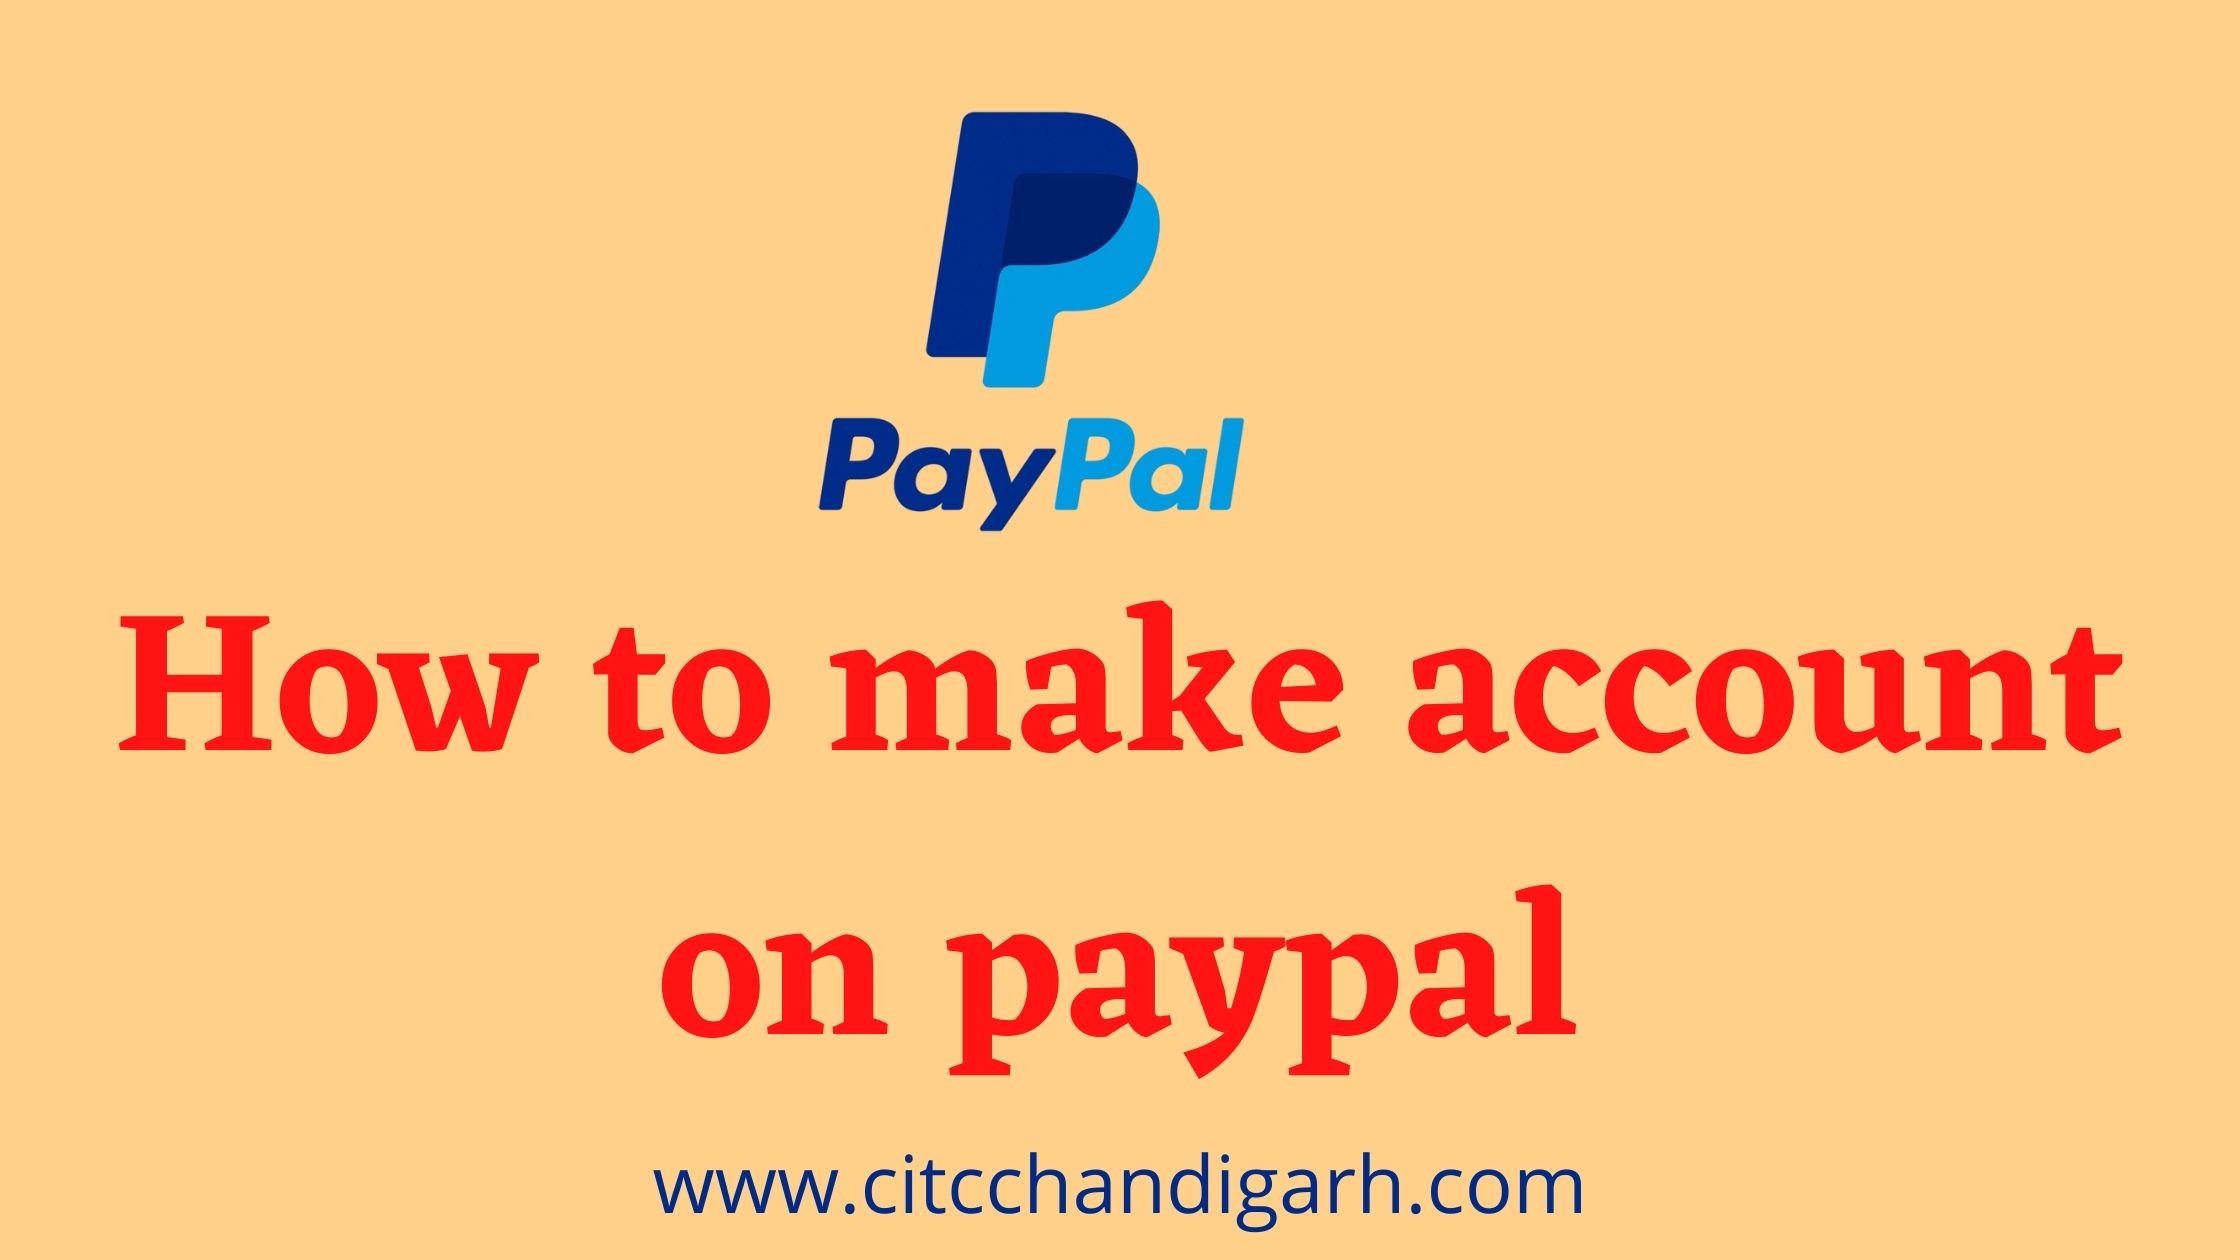 How to make account on paypal